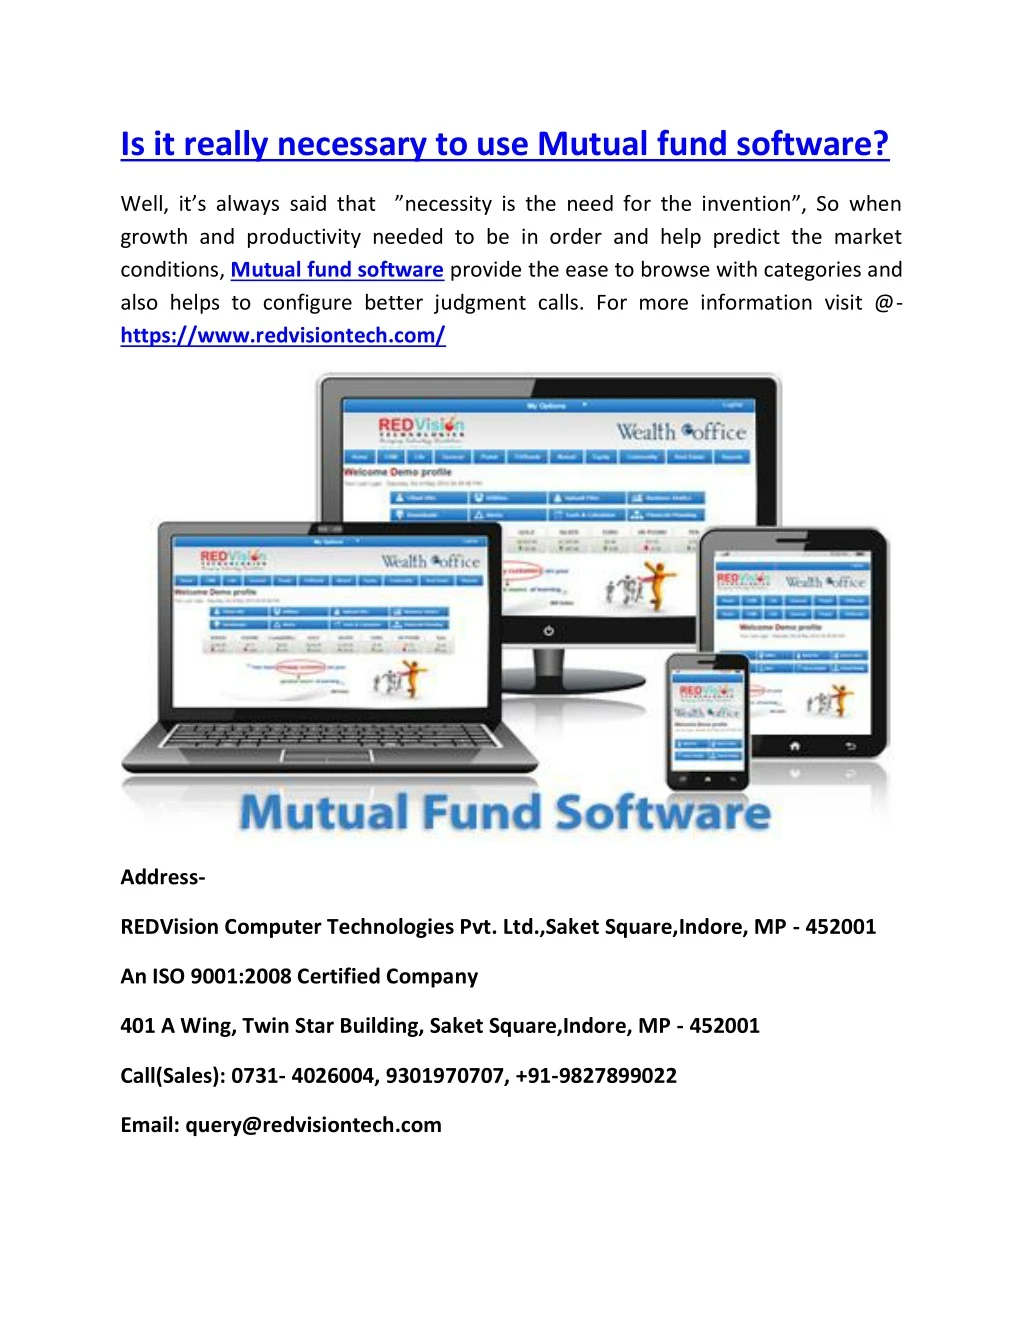 is it really necessary to use mutual fund software